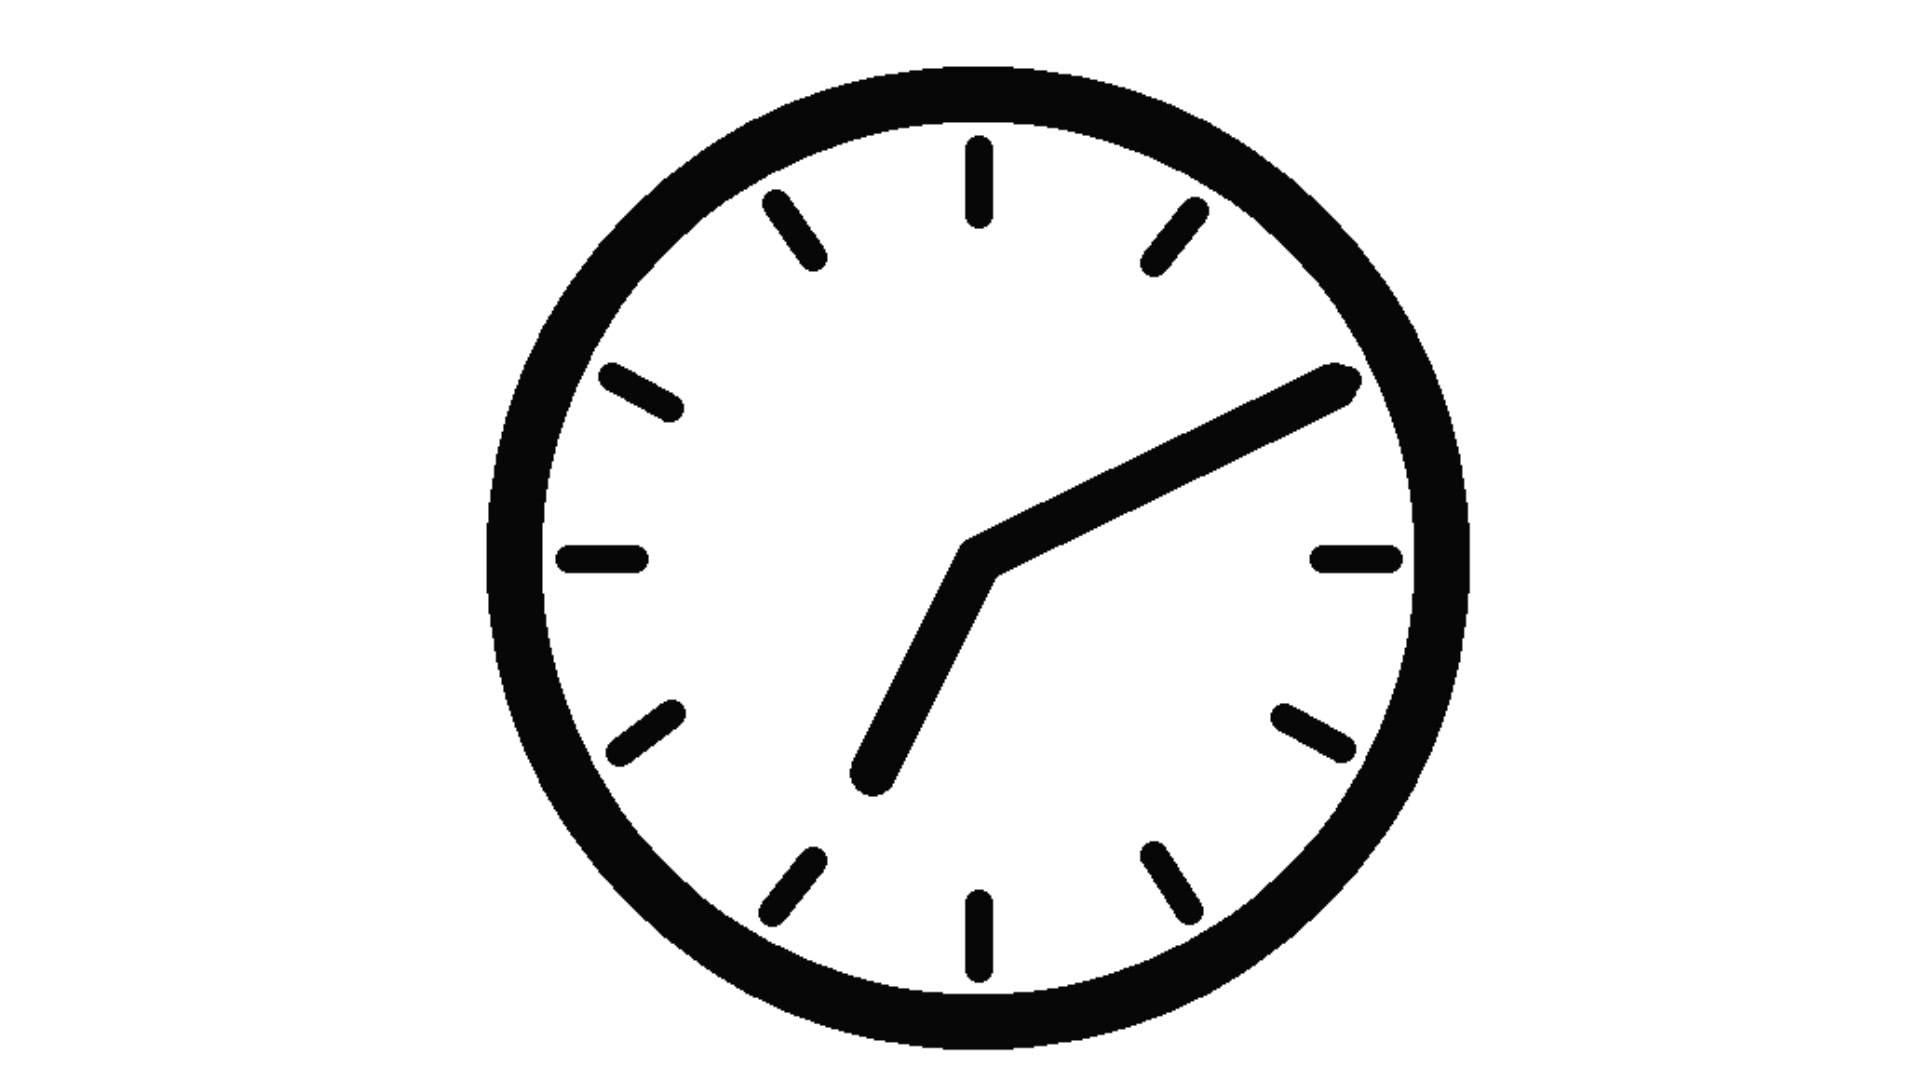 animated clock clip art free download - photo #25